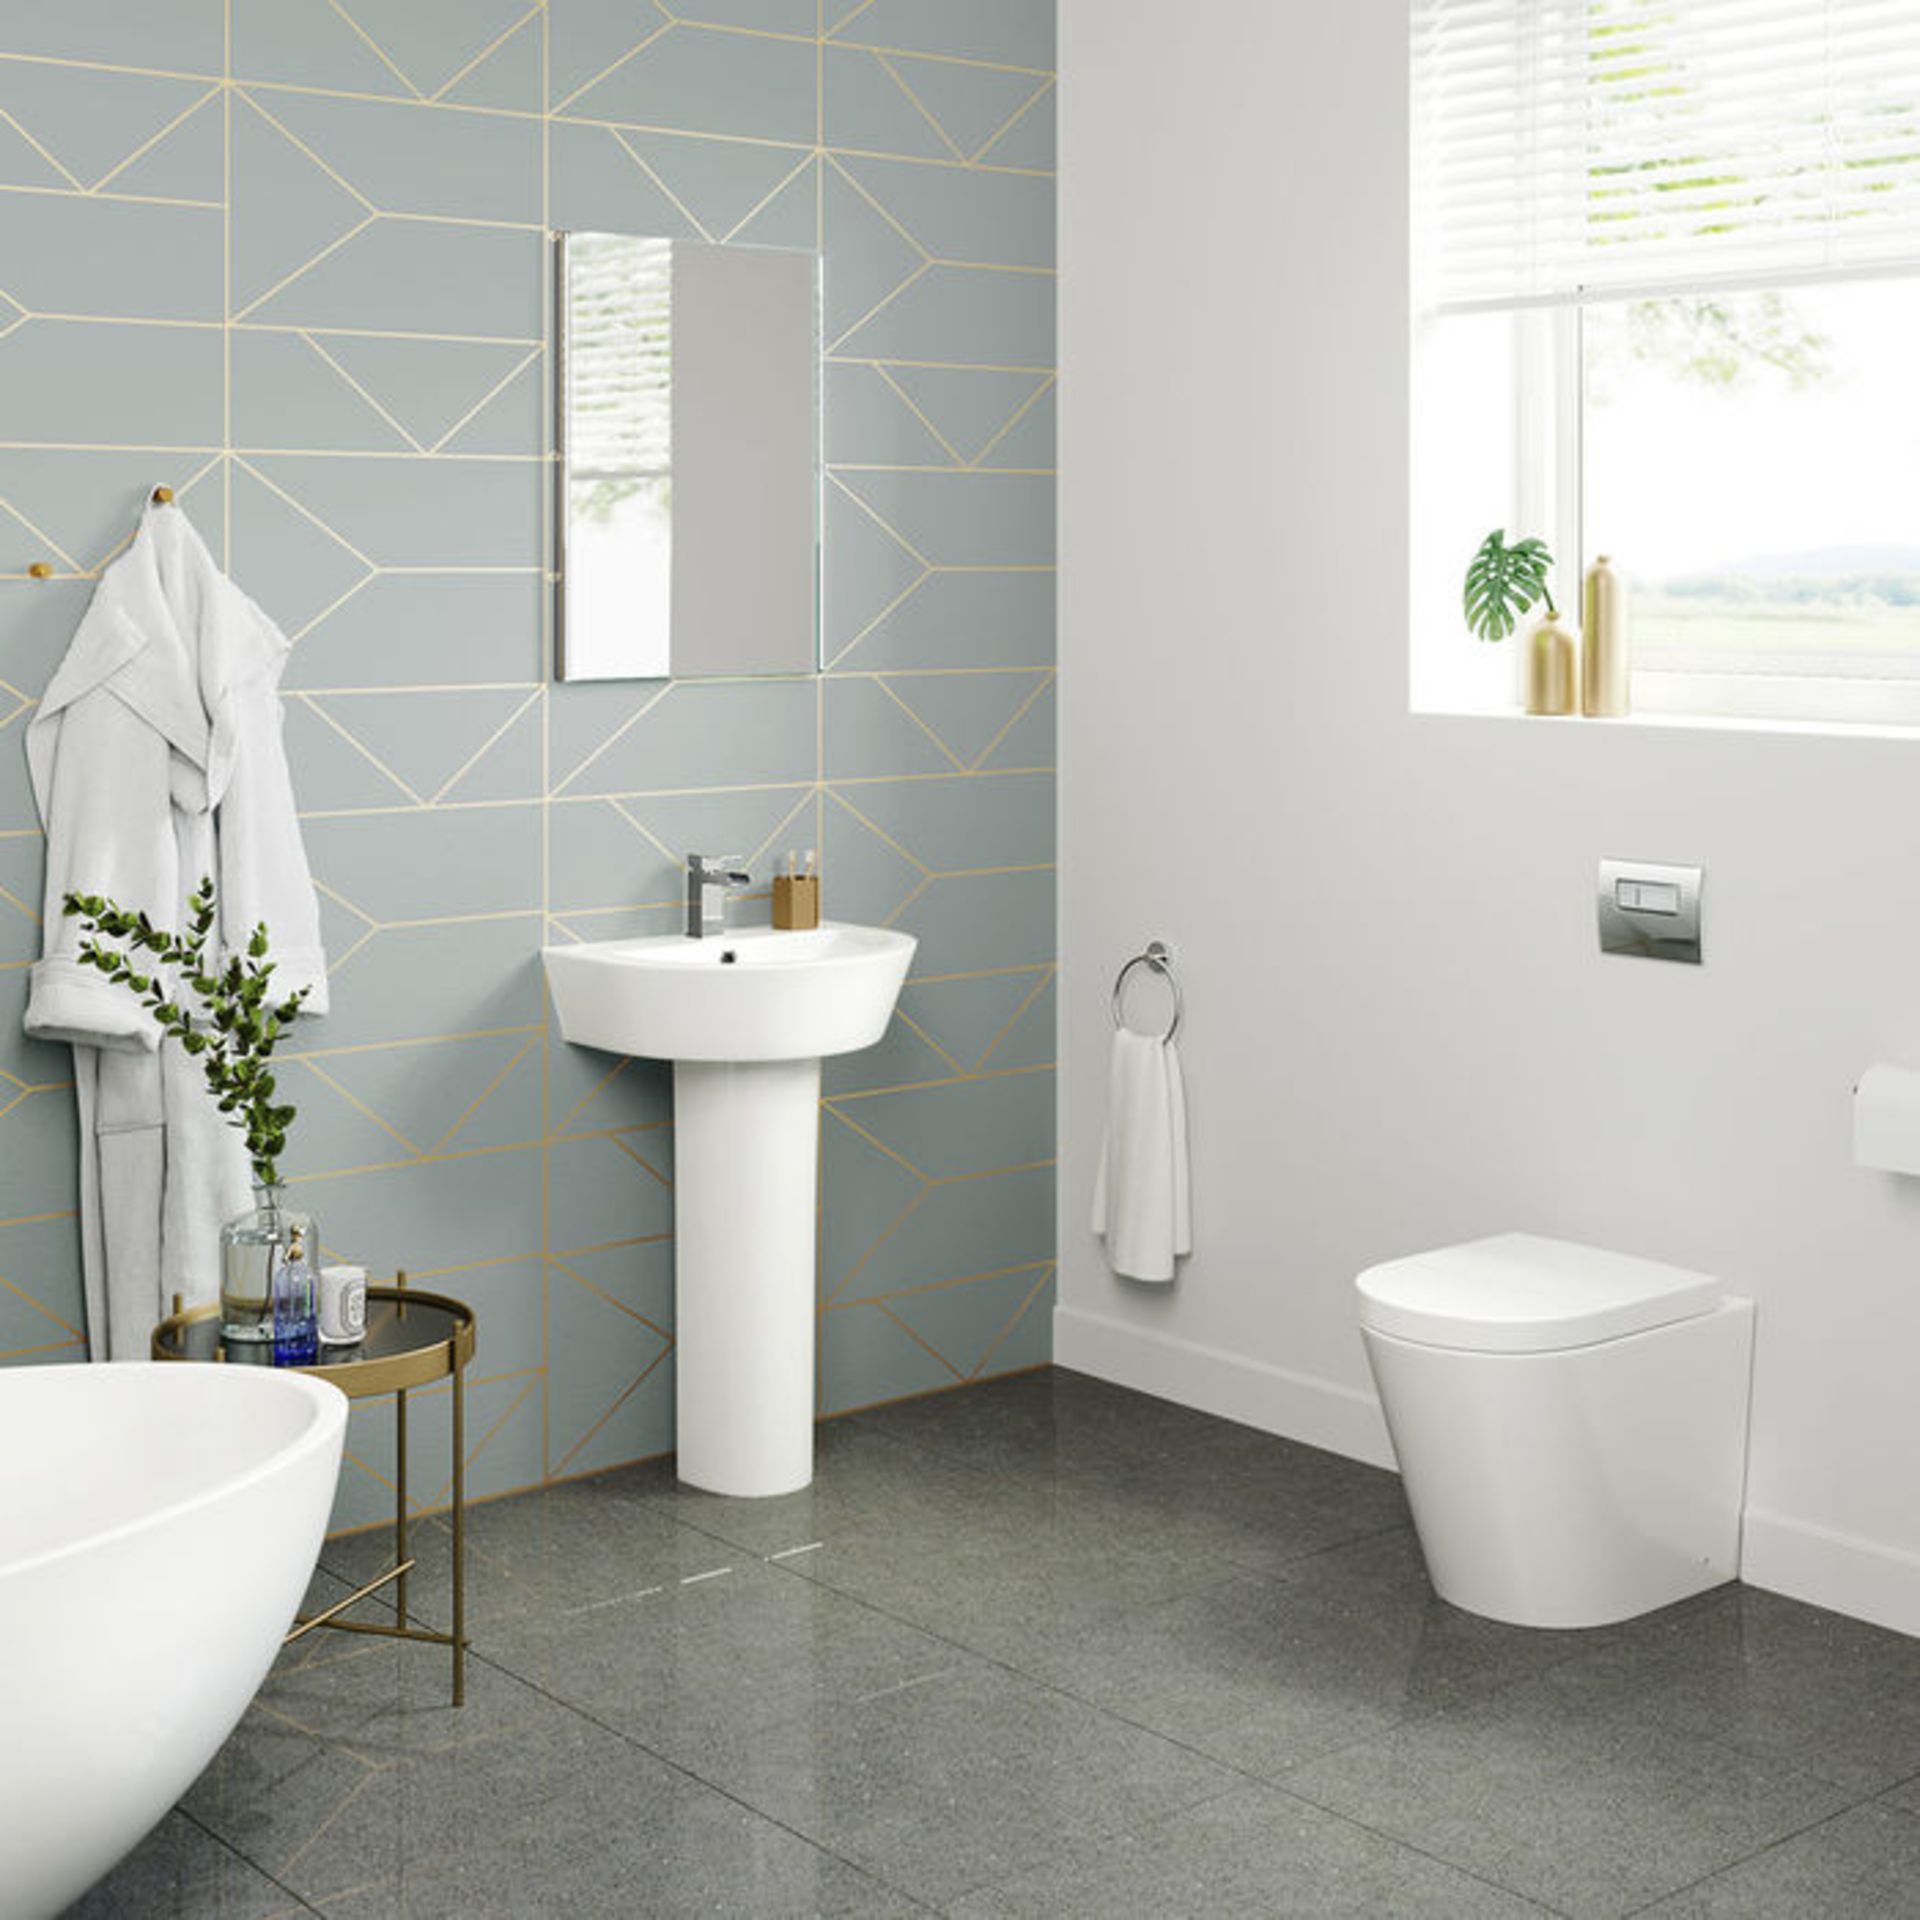 (OS106) Lyon Back to Wall Toilet inc Luxury Soft Close Seat Our Lyon back to wall toilet is made - Image 2 of 3